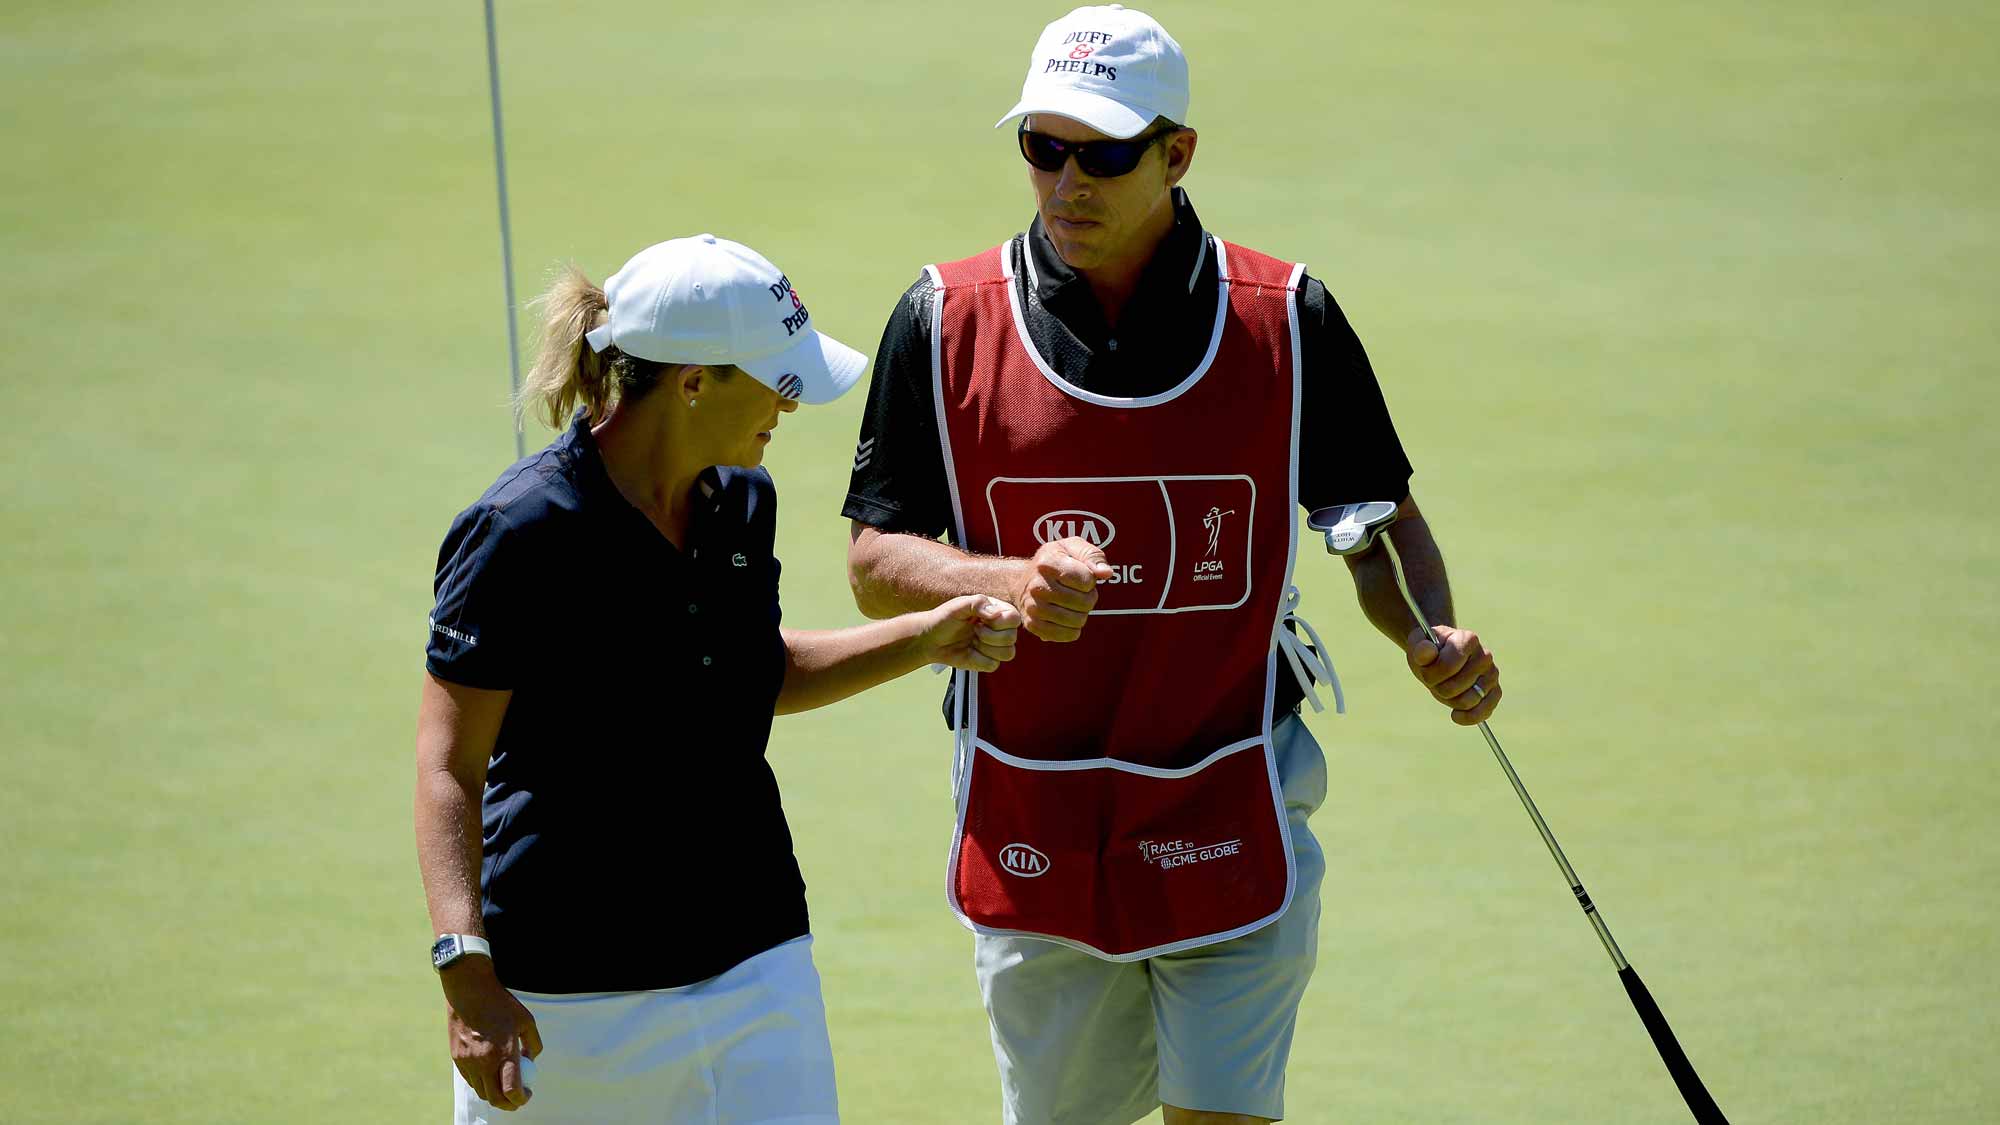 Cristie Kerr reacts to birdie putt on 8th green with caddie during Round Two of the LPGA KIA Classic at the Aviara Golf Club